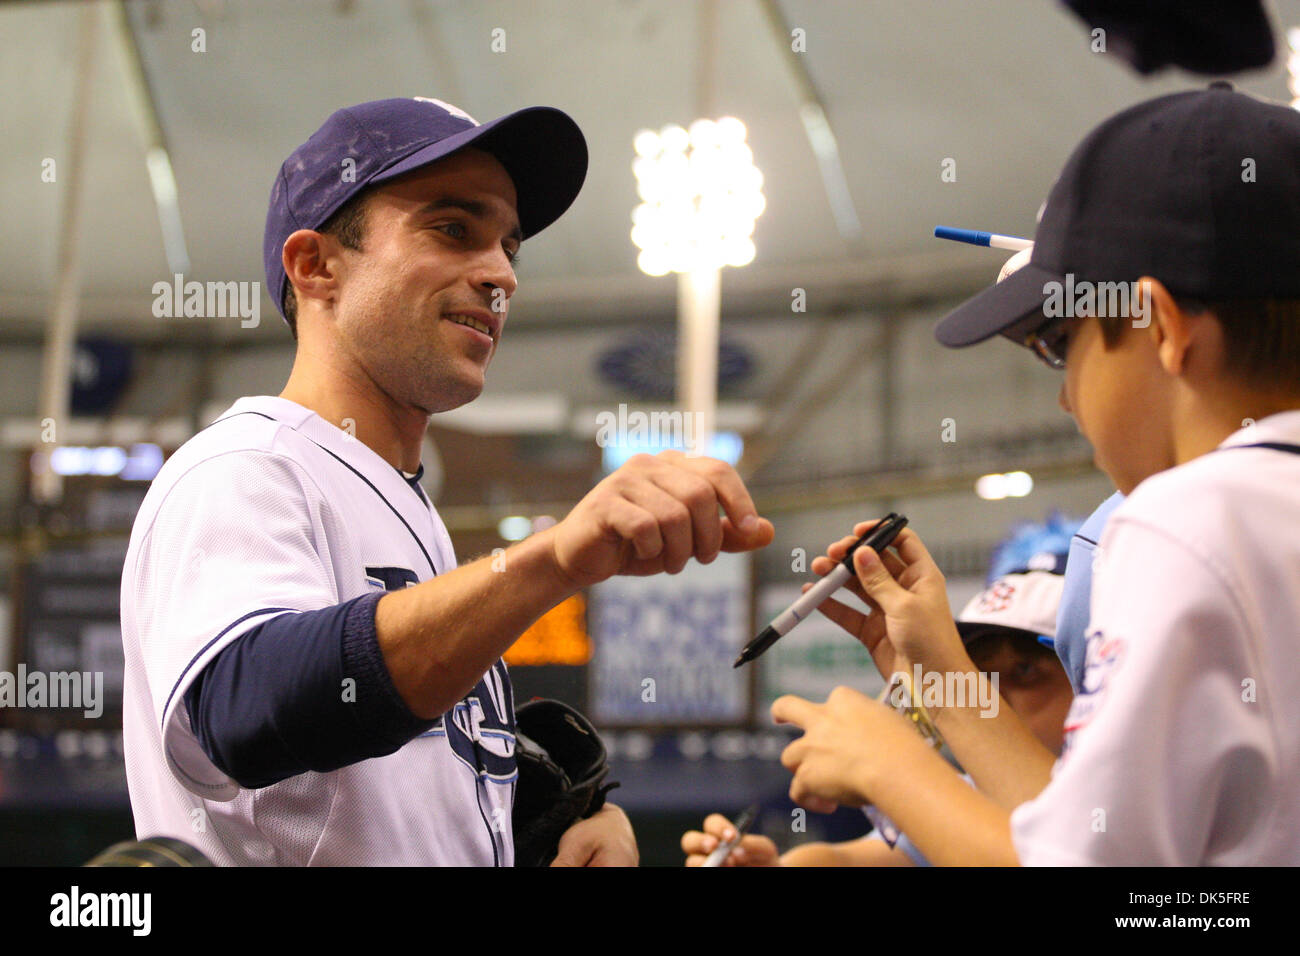 May 4, 2011 - St.Petersburg, Florida, U.S - Tampa Bay Rays left fielder Sam Fuld (5) signs for fans prior to the match up between the Tampa Bay Rays and the Toronto Blue Jays at Tropicana Field. (Credit Image: © Luke Johnson/Southcreek Global/ZUMApress.com) Stock Photo